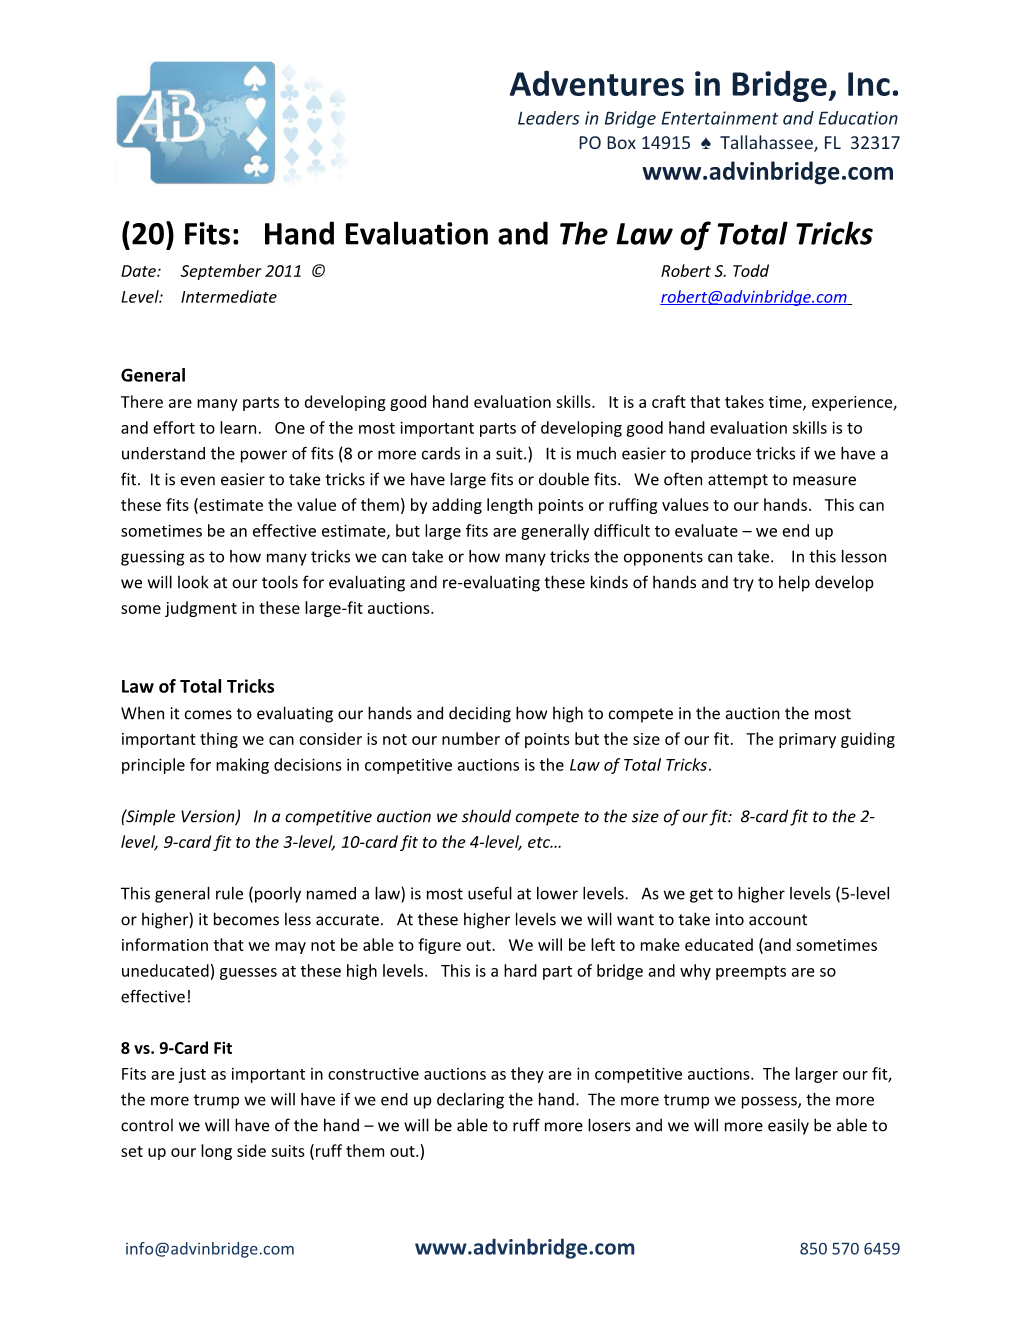 (20) Fits: Hand Evaluation and the Law of Total Tricks